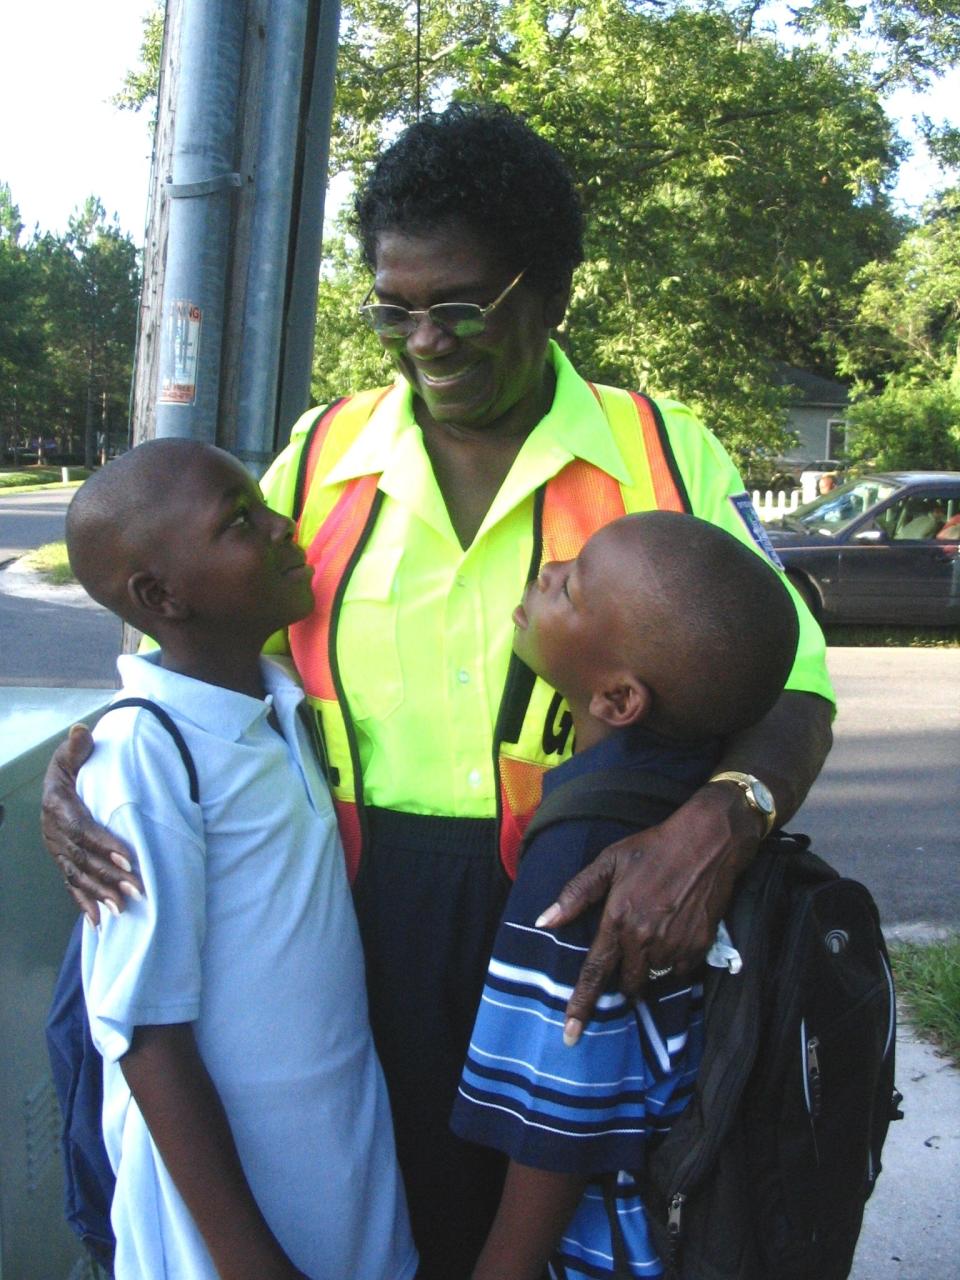 In 2006, Thelma Ray, a crossing guard for 14 years, gets a hug from brothers David (left), 9, and Dakoby Jones, 8, on the first day of school at Pine Forest Elementary School of the Arts. Her relationship with Pine Forest goes back to its opening in 1963 when she was its first PTA president. In 2007 she was among those honored at an annual hall of fame banquet for the J.P. Small Foundation, which helps youths build development skills.